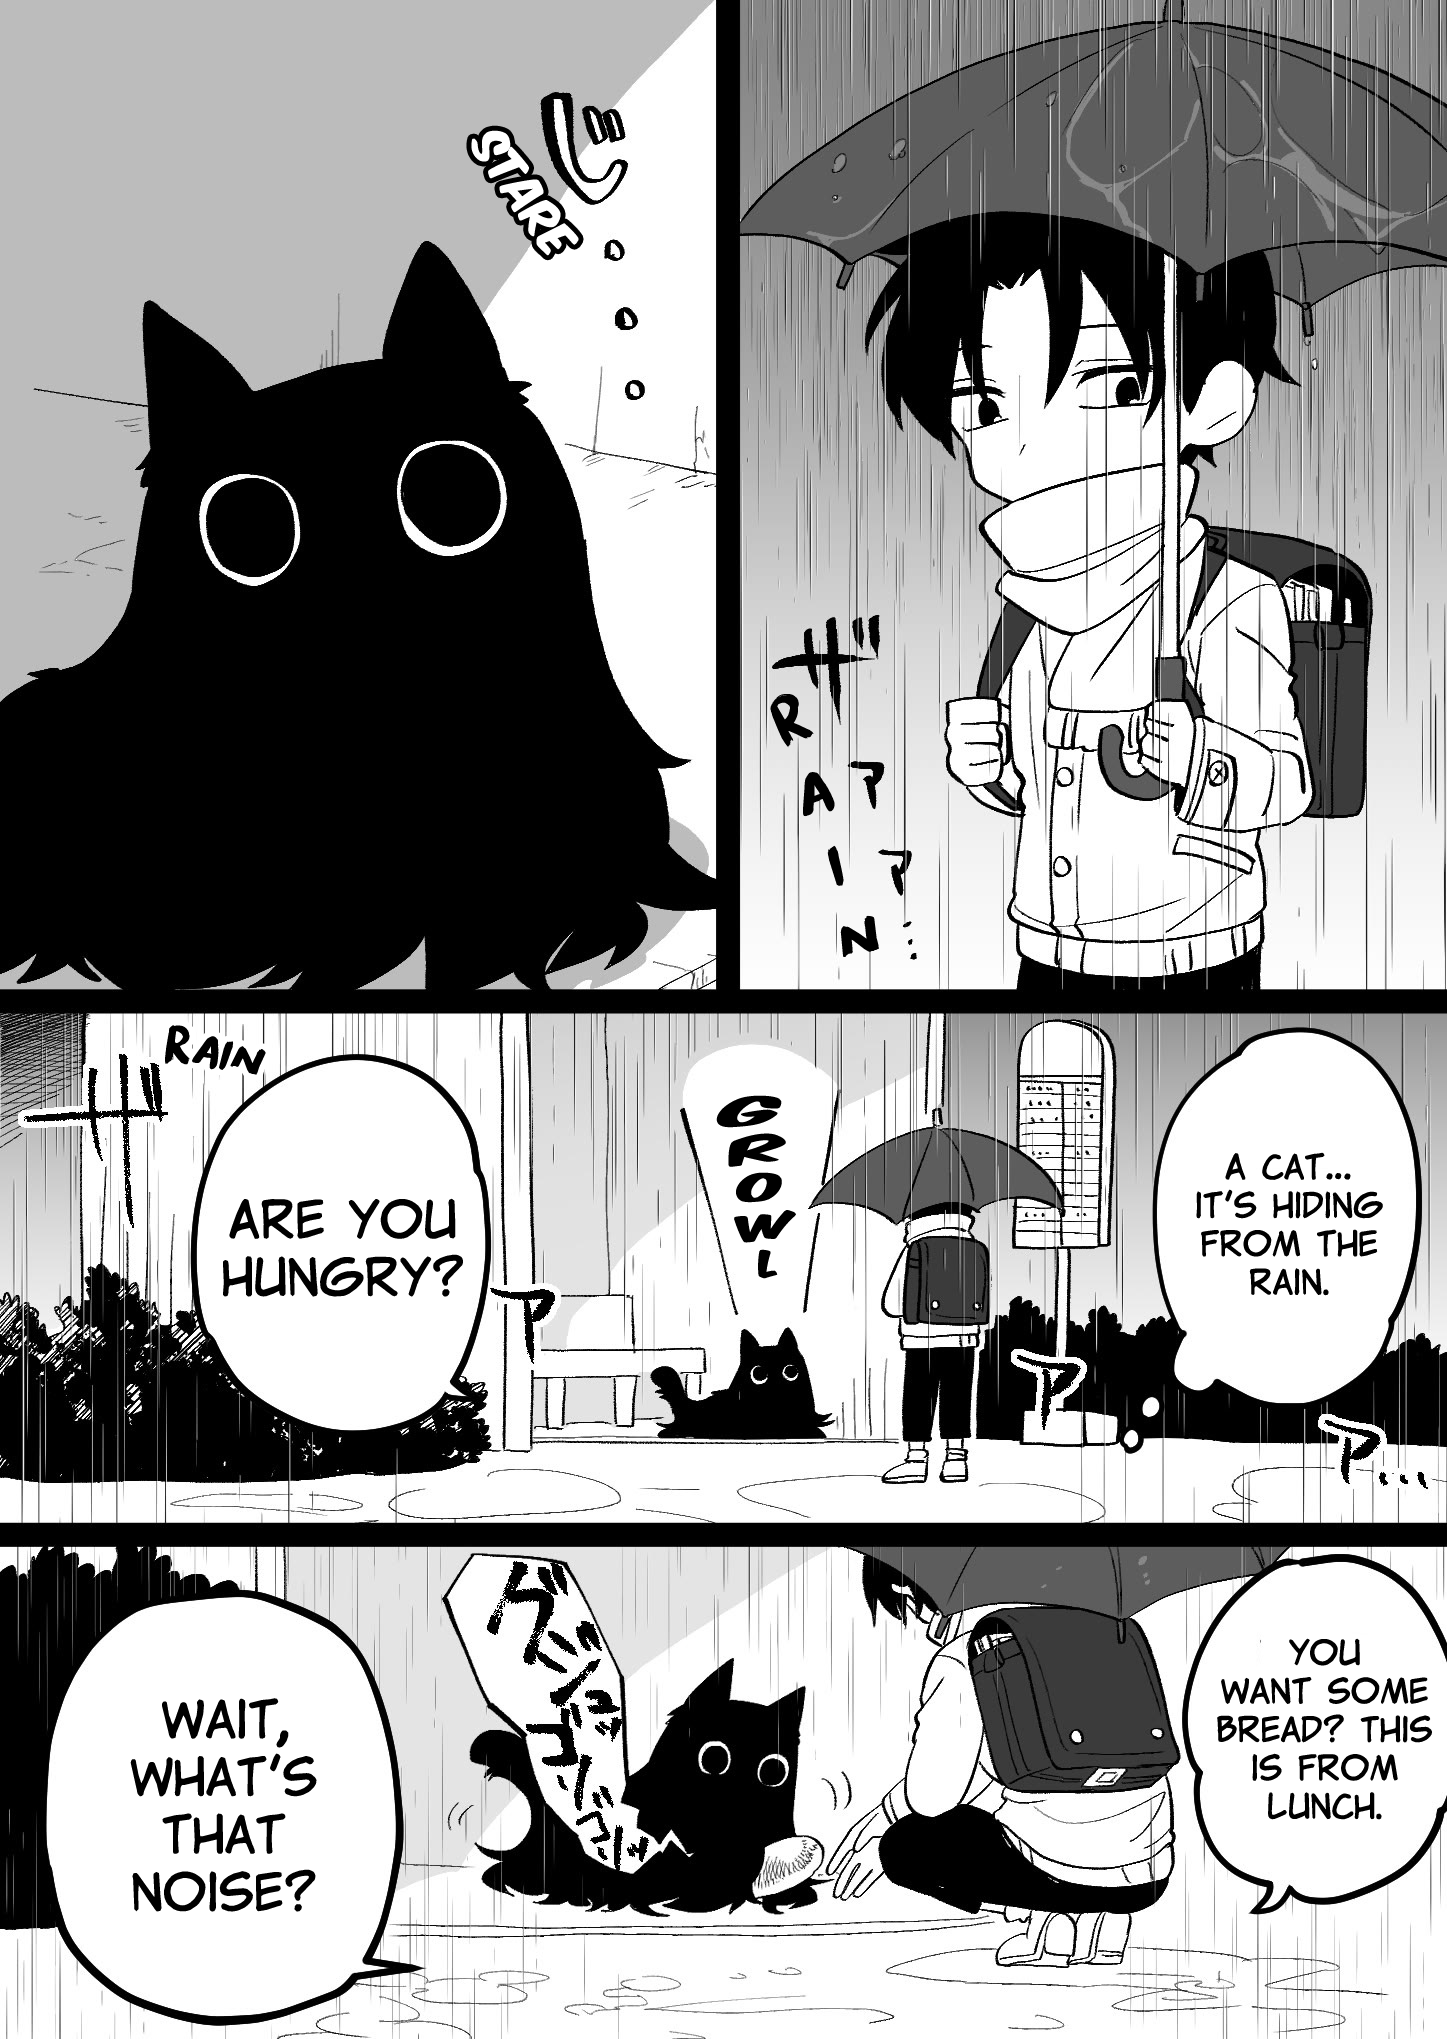 Neko no You na Nanika - Chapter 5802 - When you stare into the abyss, the abyss stares back - Image 1